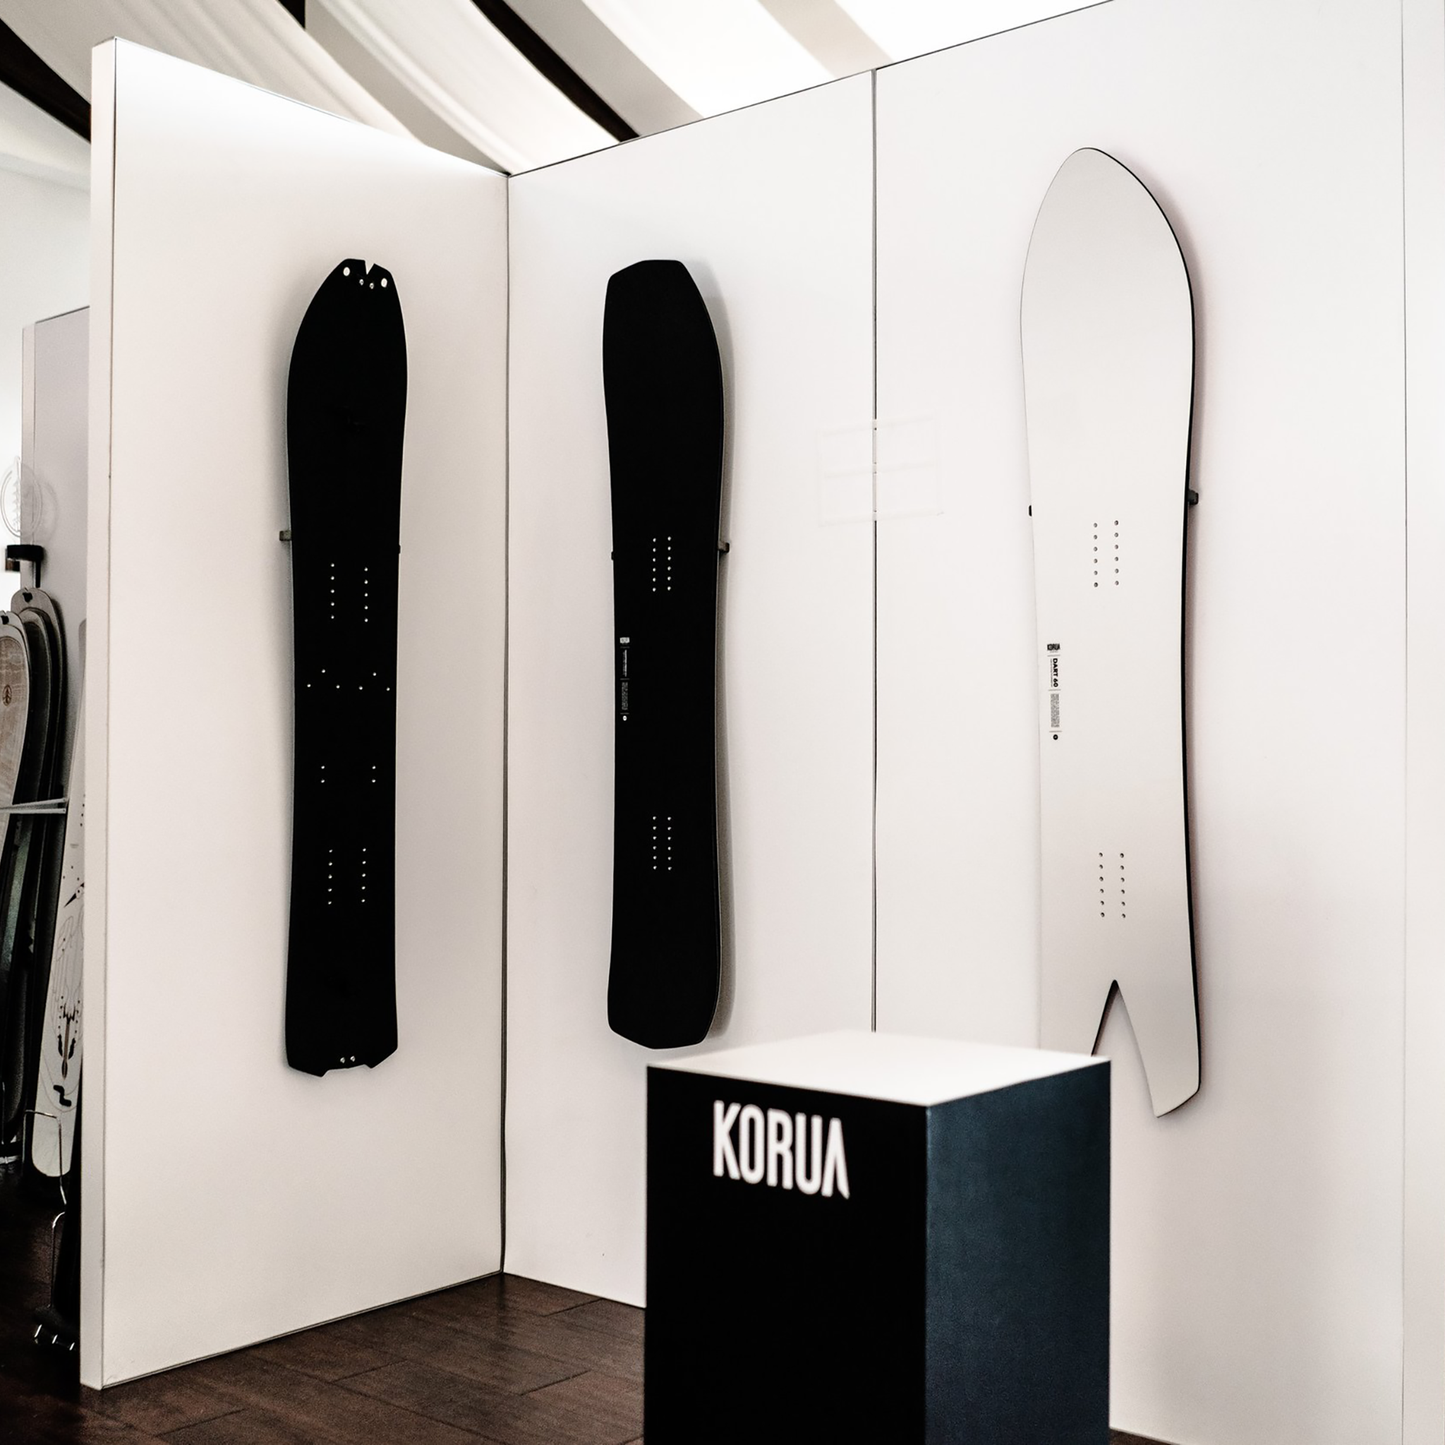 Hover. The Wall Mount Snowboard